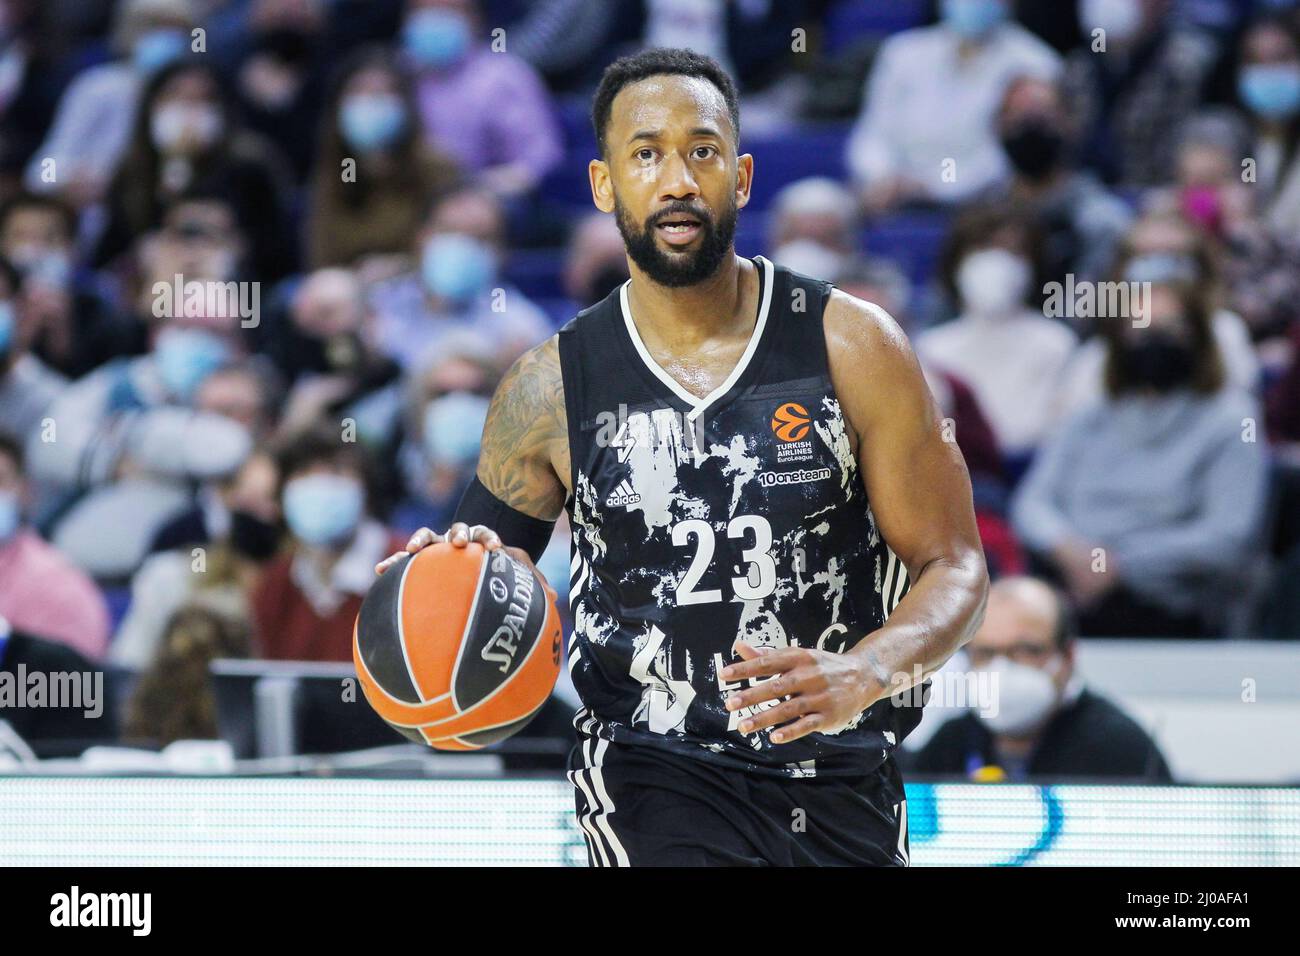 Madrid, Spain. 17th Mar, 2022. David Lighty of Asvel Lyon-Villeurbanne during the Turkish Airlines Euroleague basketball match between Real Madrid and Asvel Lyon-Villeurbanne on march 17, 2022 at Wizink Center in Madrid, Spain Credit: Independent Photo Agency/Alamy Live Newss Stock Photo